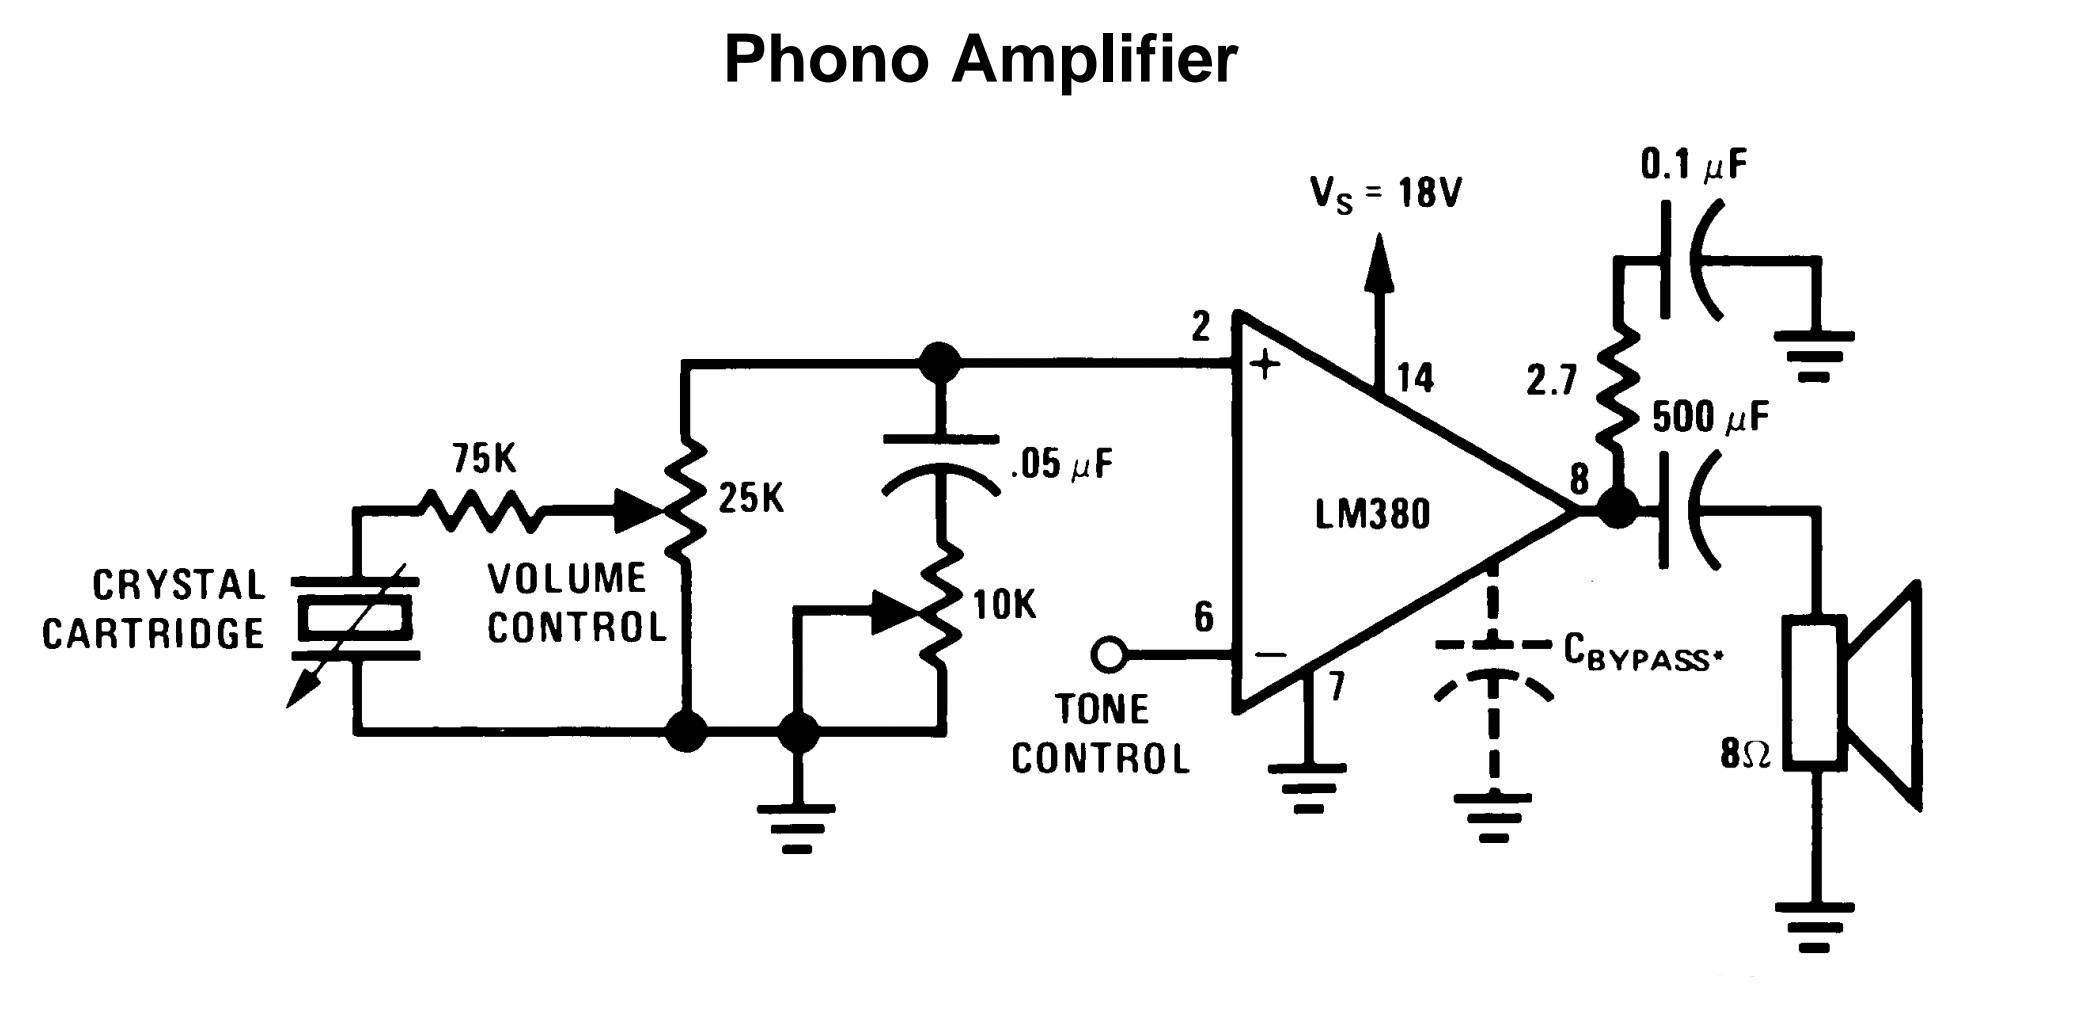 Phone amplifier using lm380 IC